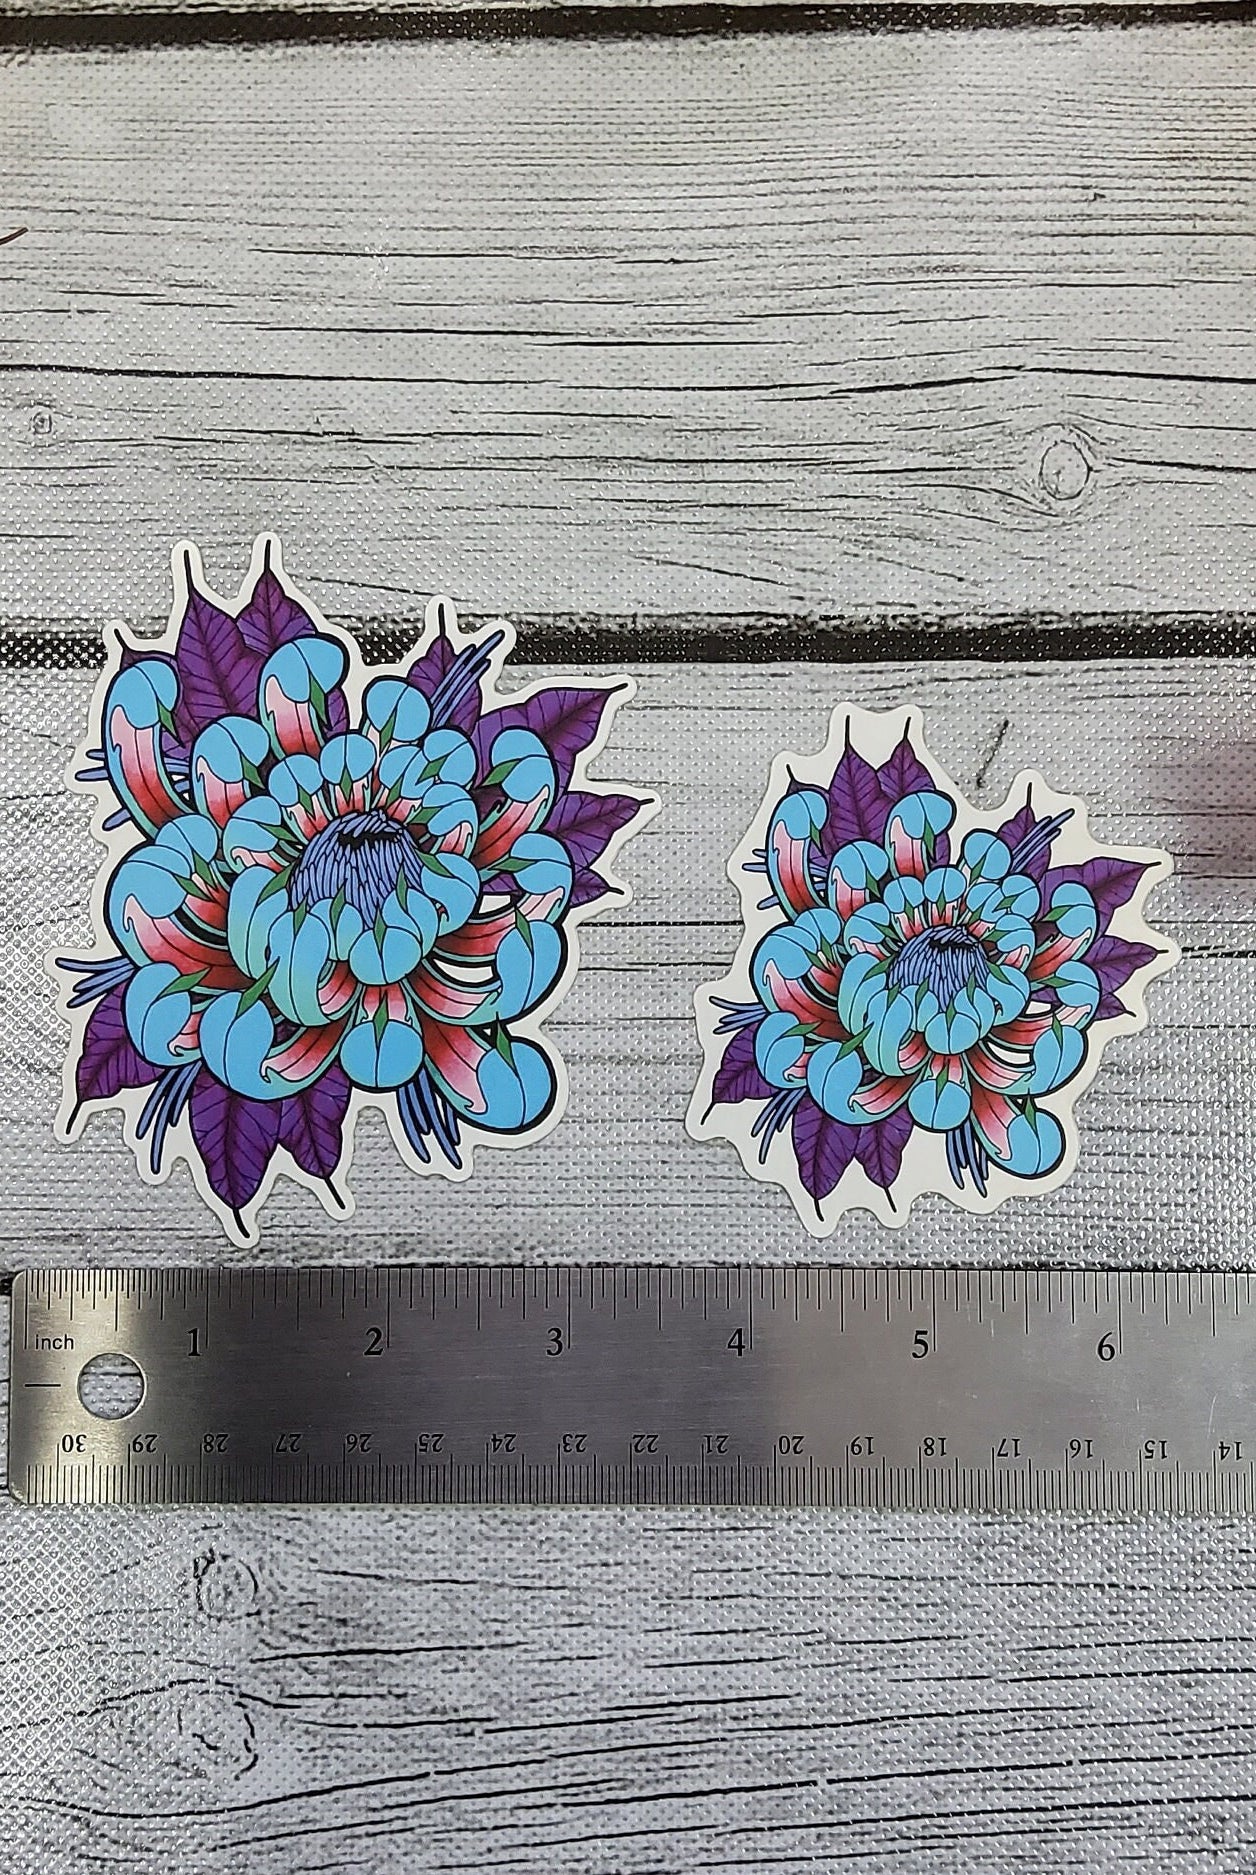 MATTE STICKER: Tattoo Style Blue and Red Chrysanthemum , Chrysanthemum Sticker , Chrysanthemum Art , Floral Sticker , Floral Art Sticker